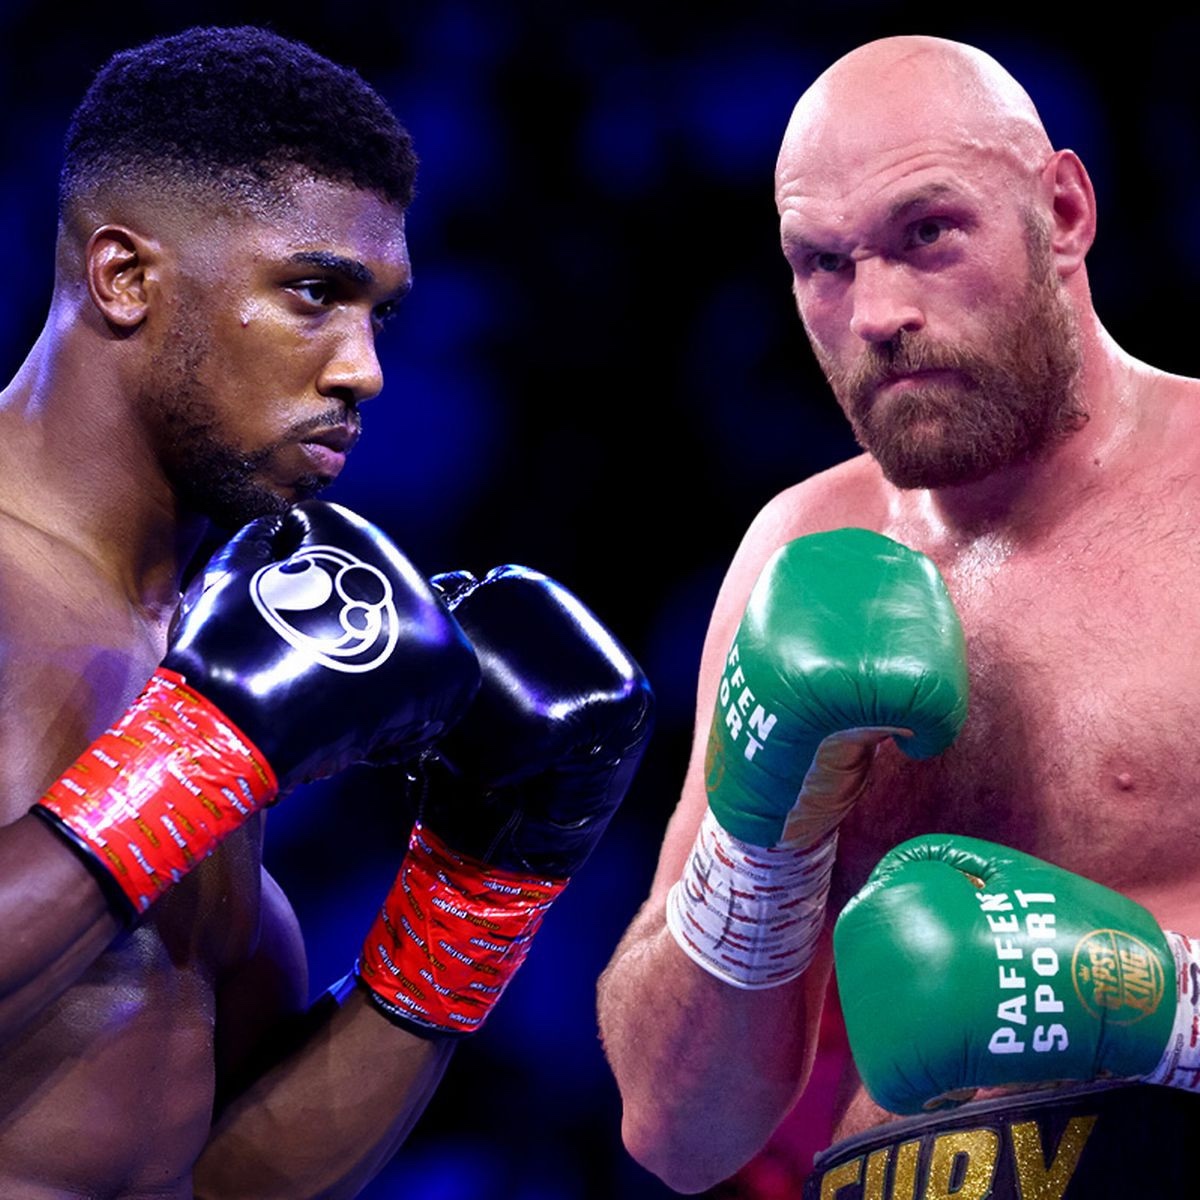 Anthony Joshua’s team confirms he’s accepted Tyson Fury’s offer of a 60-40 purse split to fight him